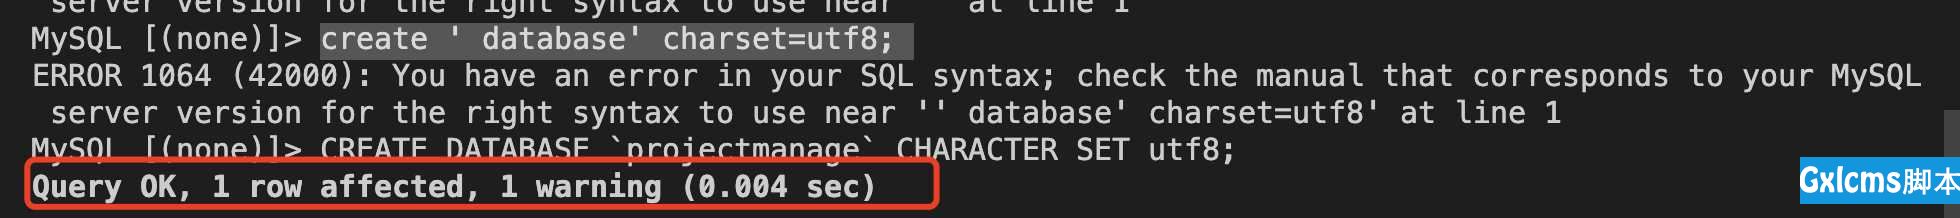 Django中创建数据库报错：ERROR 1064 (42000): You have an error in your SQL syntax; check the manual that corresponds to your MySQL server version for the right syntax to use near '=utf8' at line 1解决方案 - 文章图片